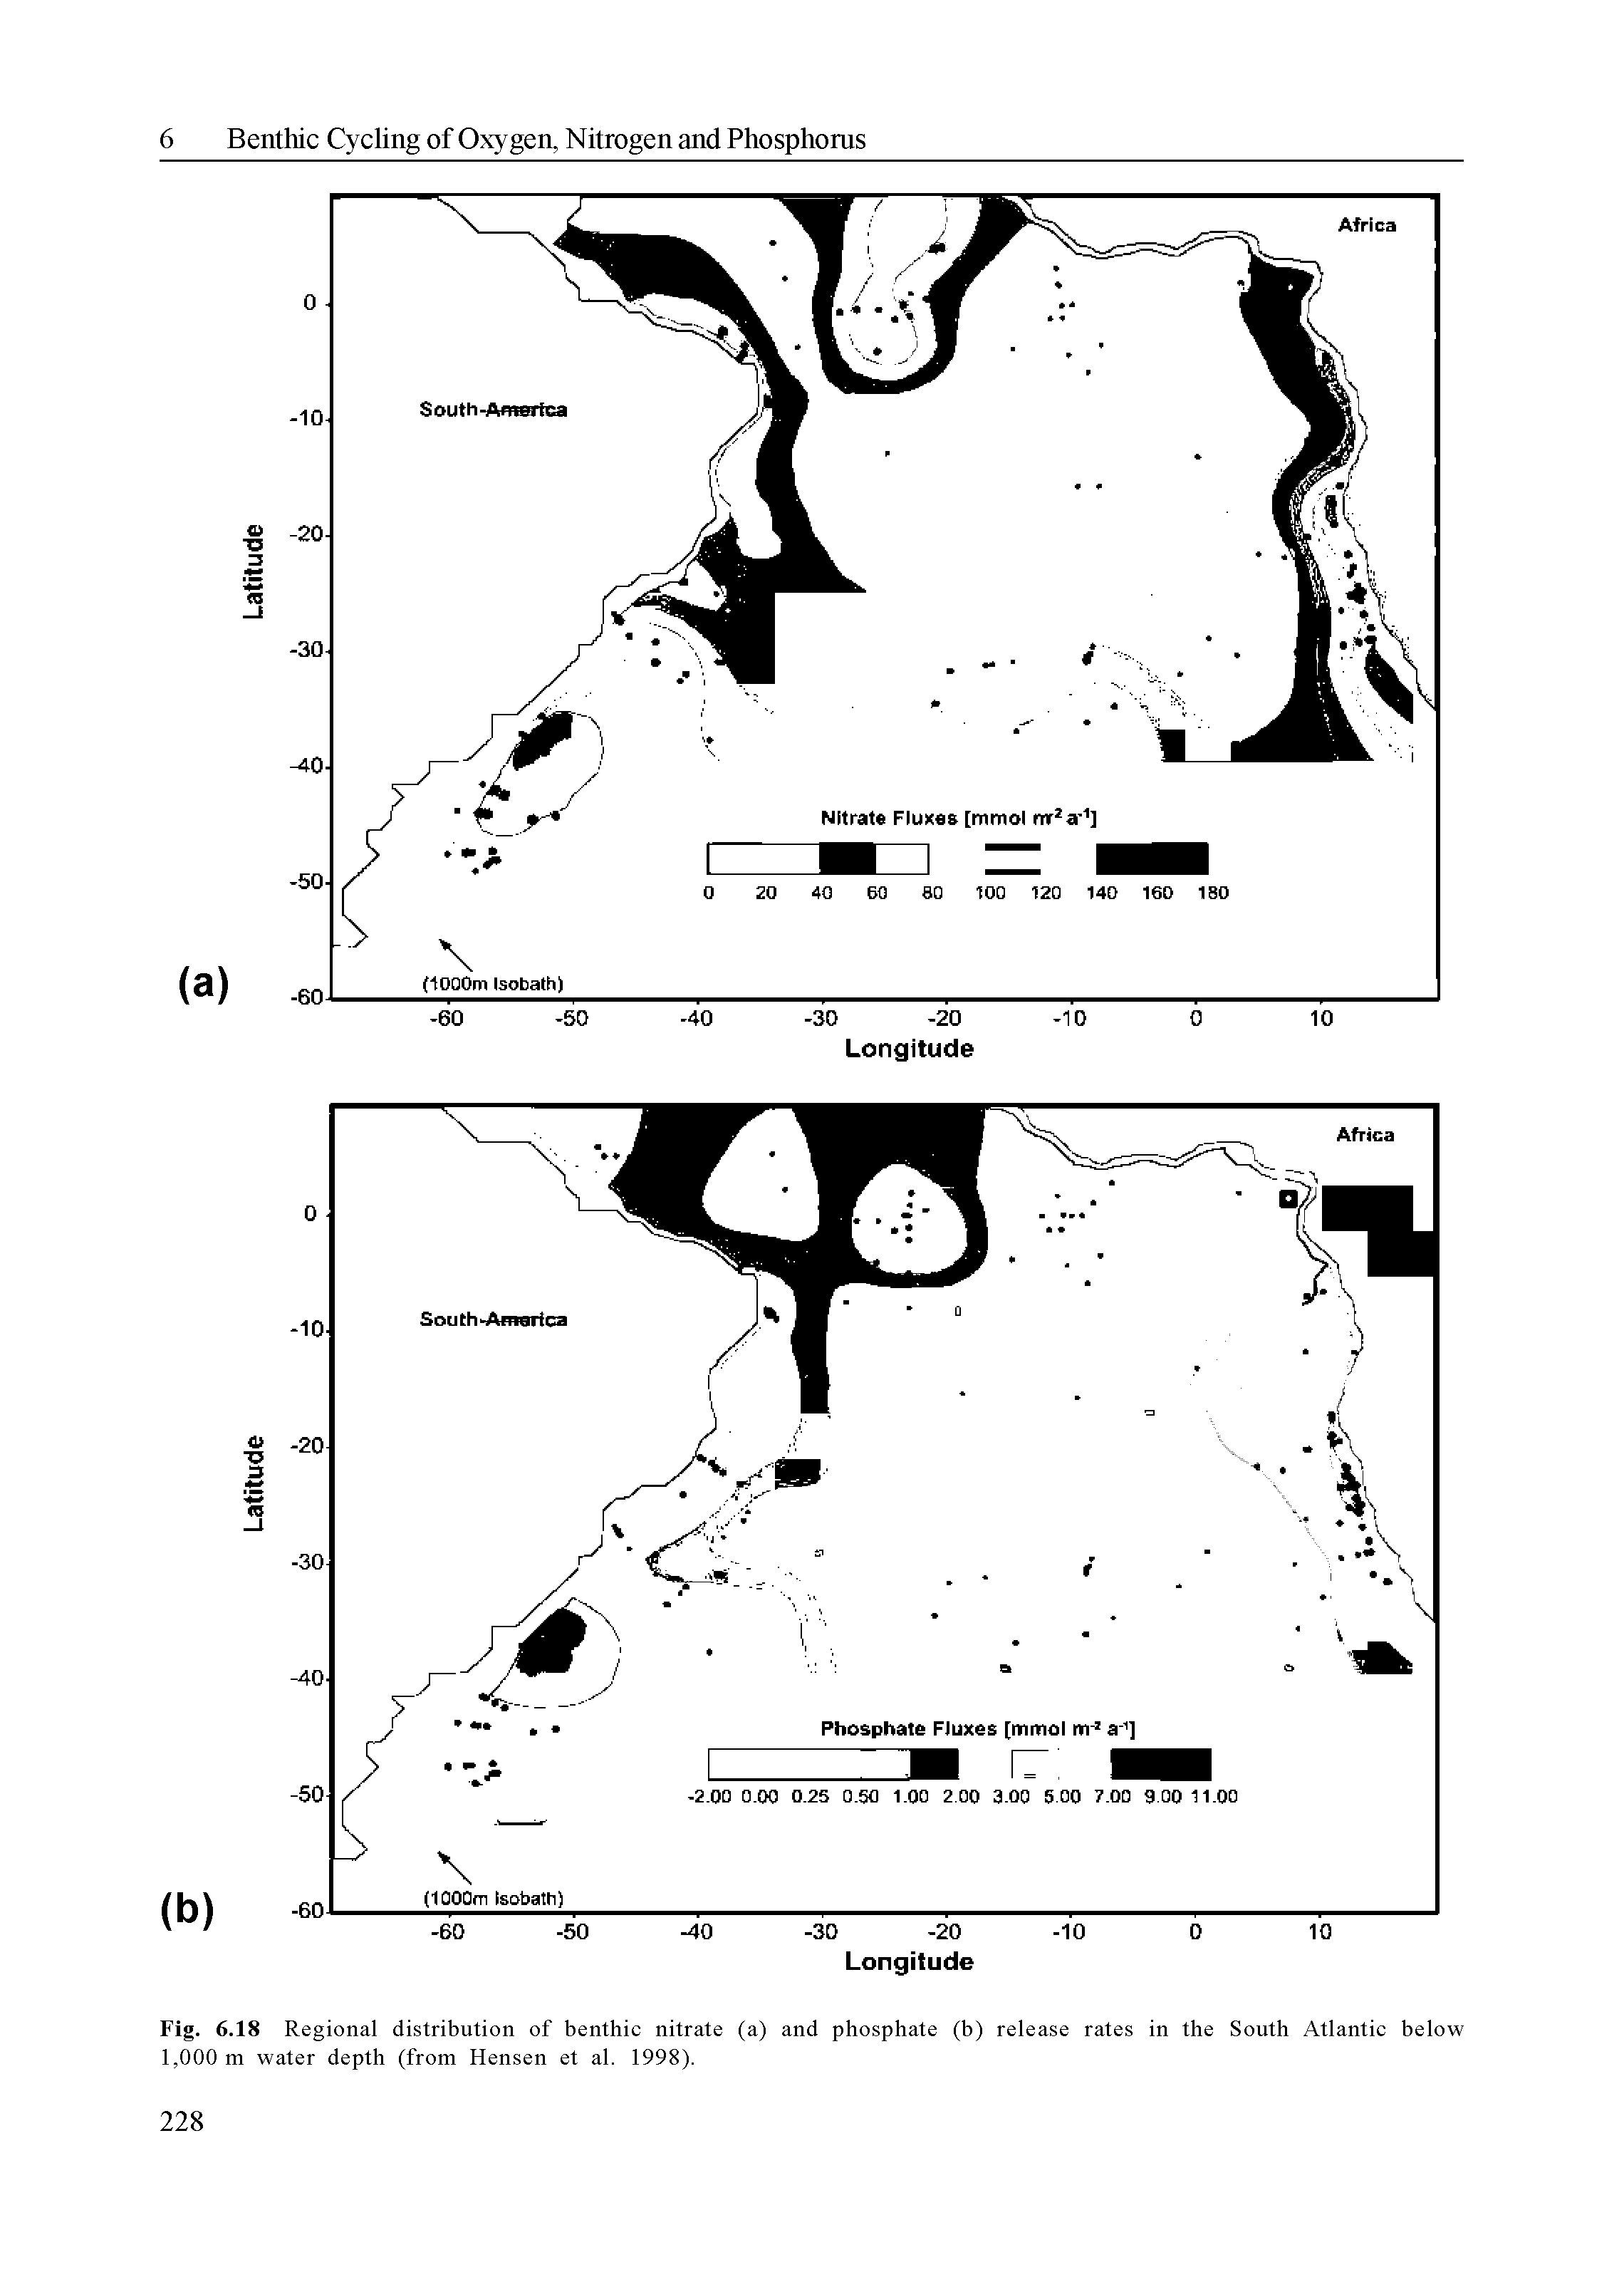 Fig. 6.18 Regional distribution of benthic nitrate (a) and phosphate (b) release rates in the South Atlantic below 1,000 m water depth (from Hensen et al. 1998).